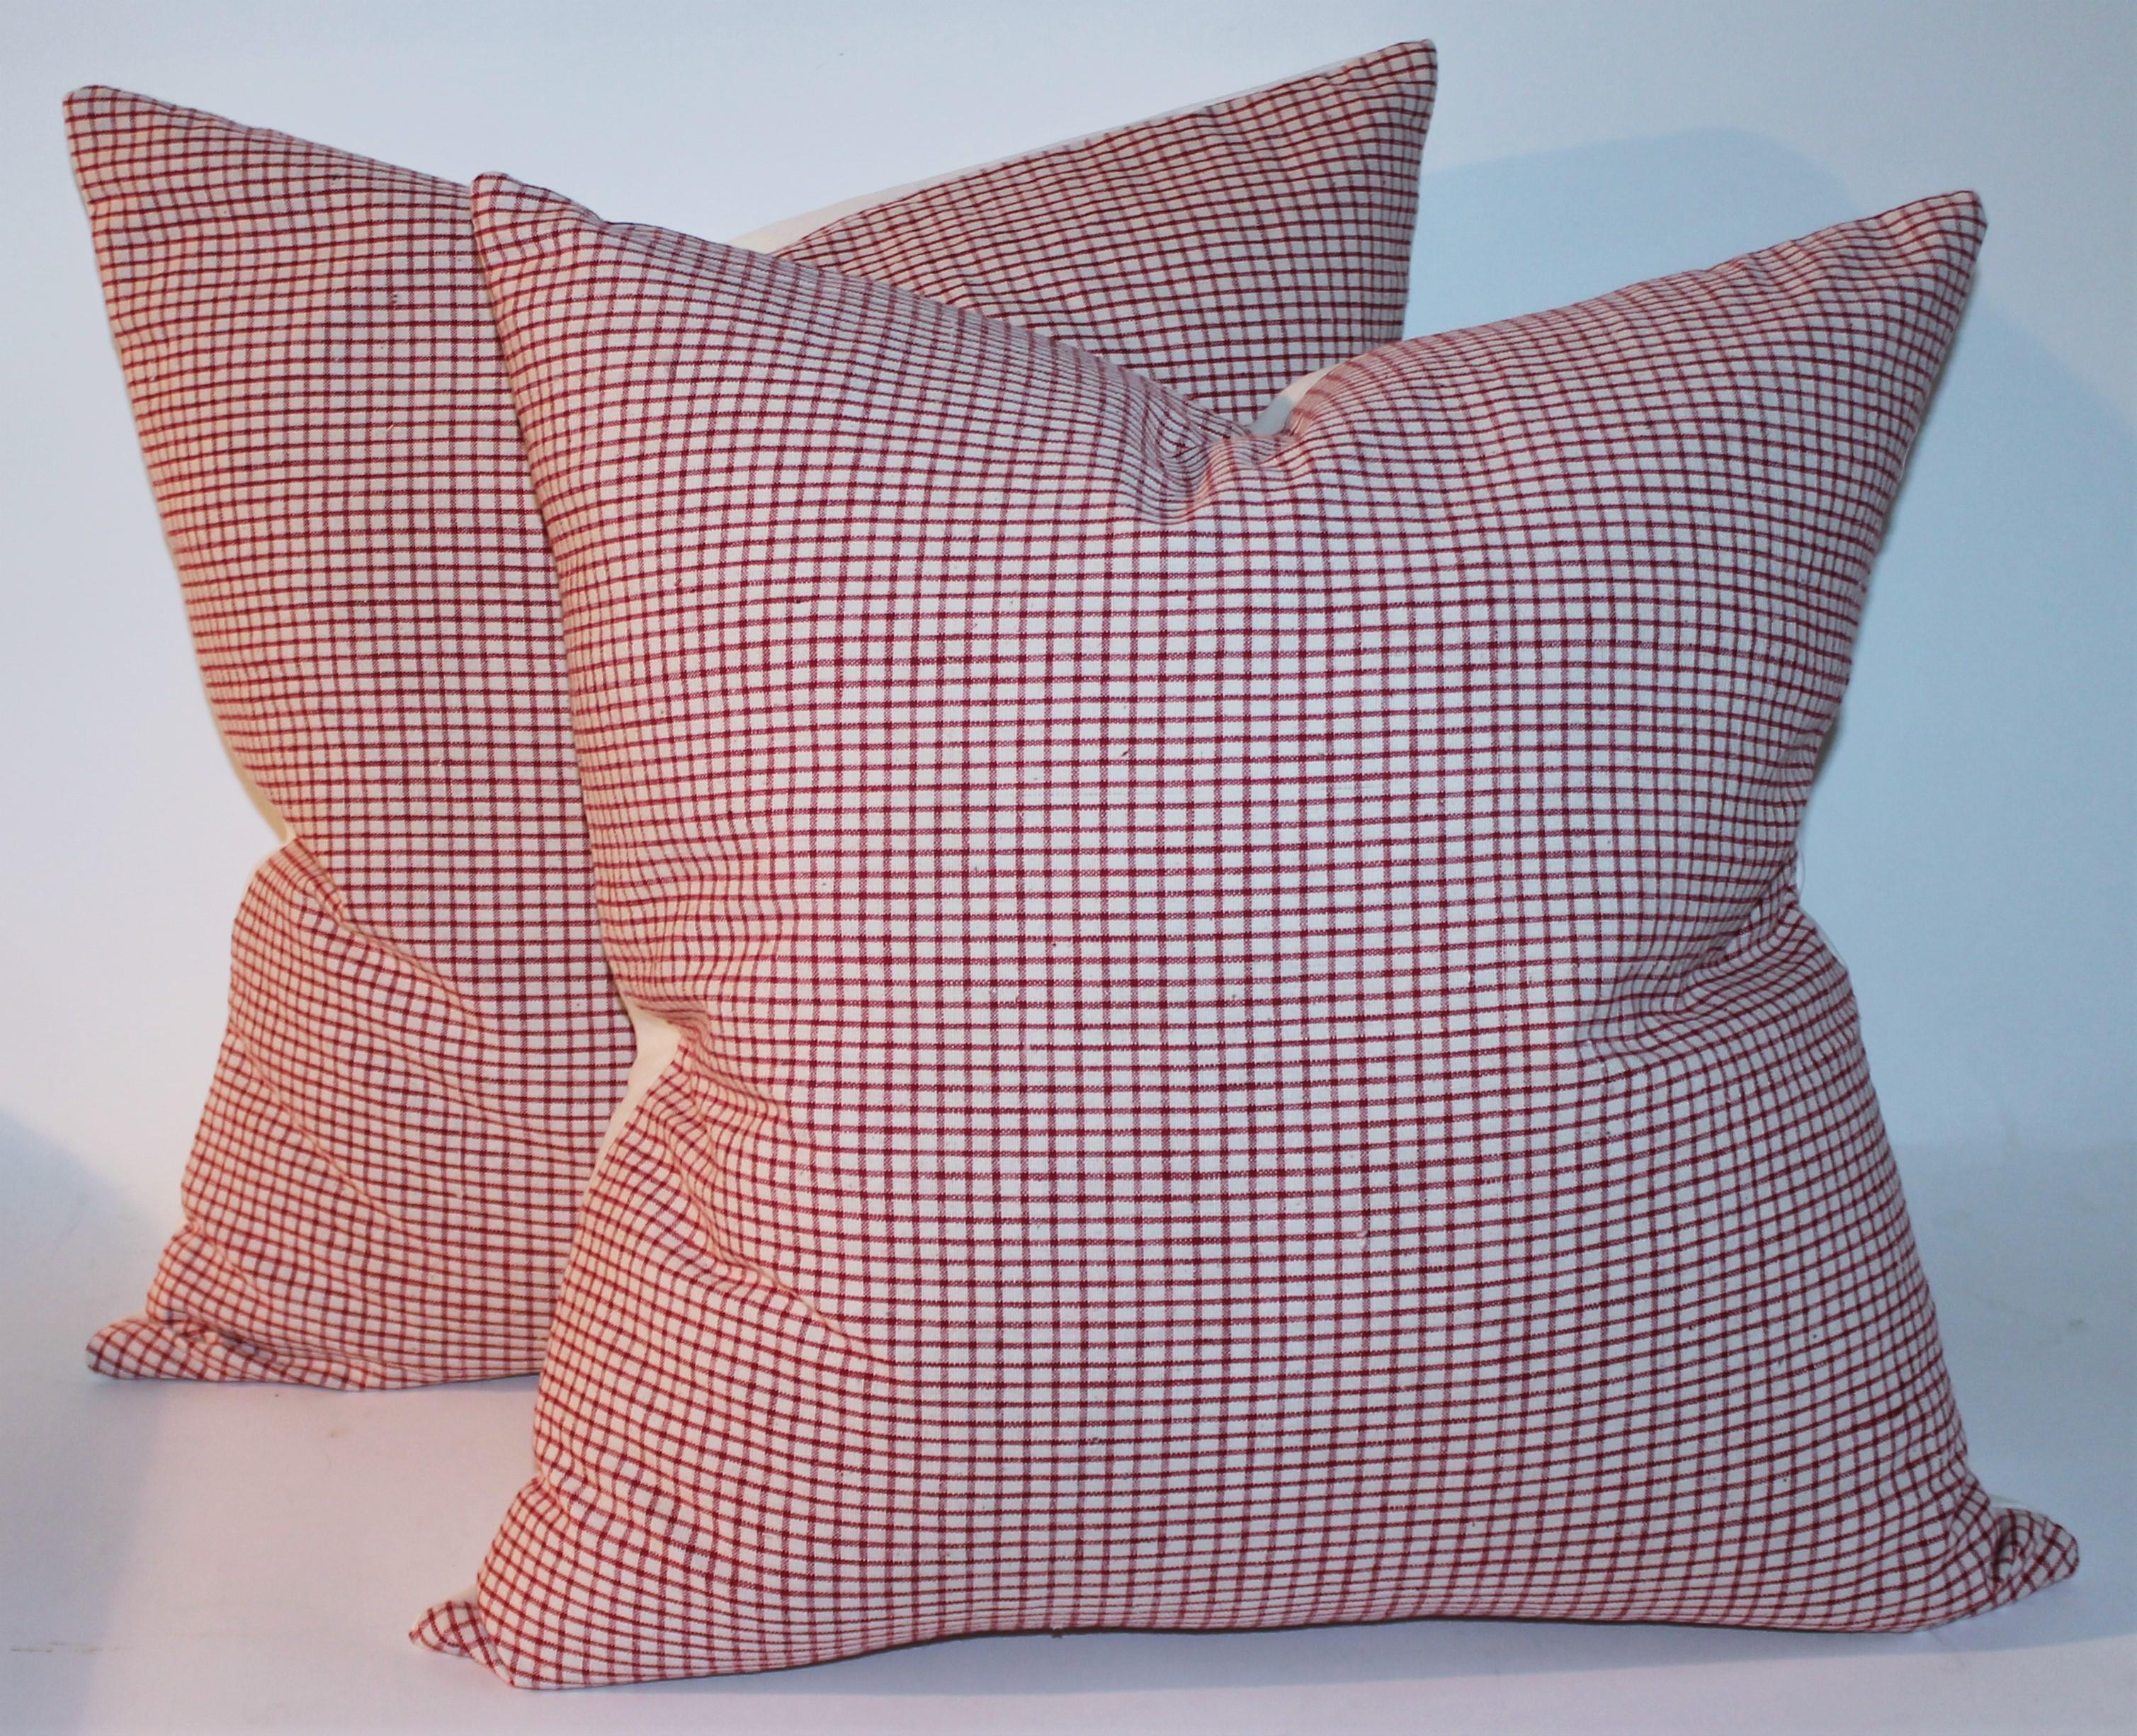 Two pairs of red & white check homespun linen pillows with white cotton linen backings. This is the euro linen from England. Both pairs are in pristine condition and have down & feather fill.

Measures: 1 pair of 20 x 20
1 pair of 22 x 22.